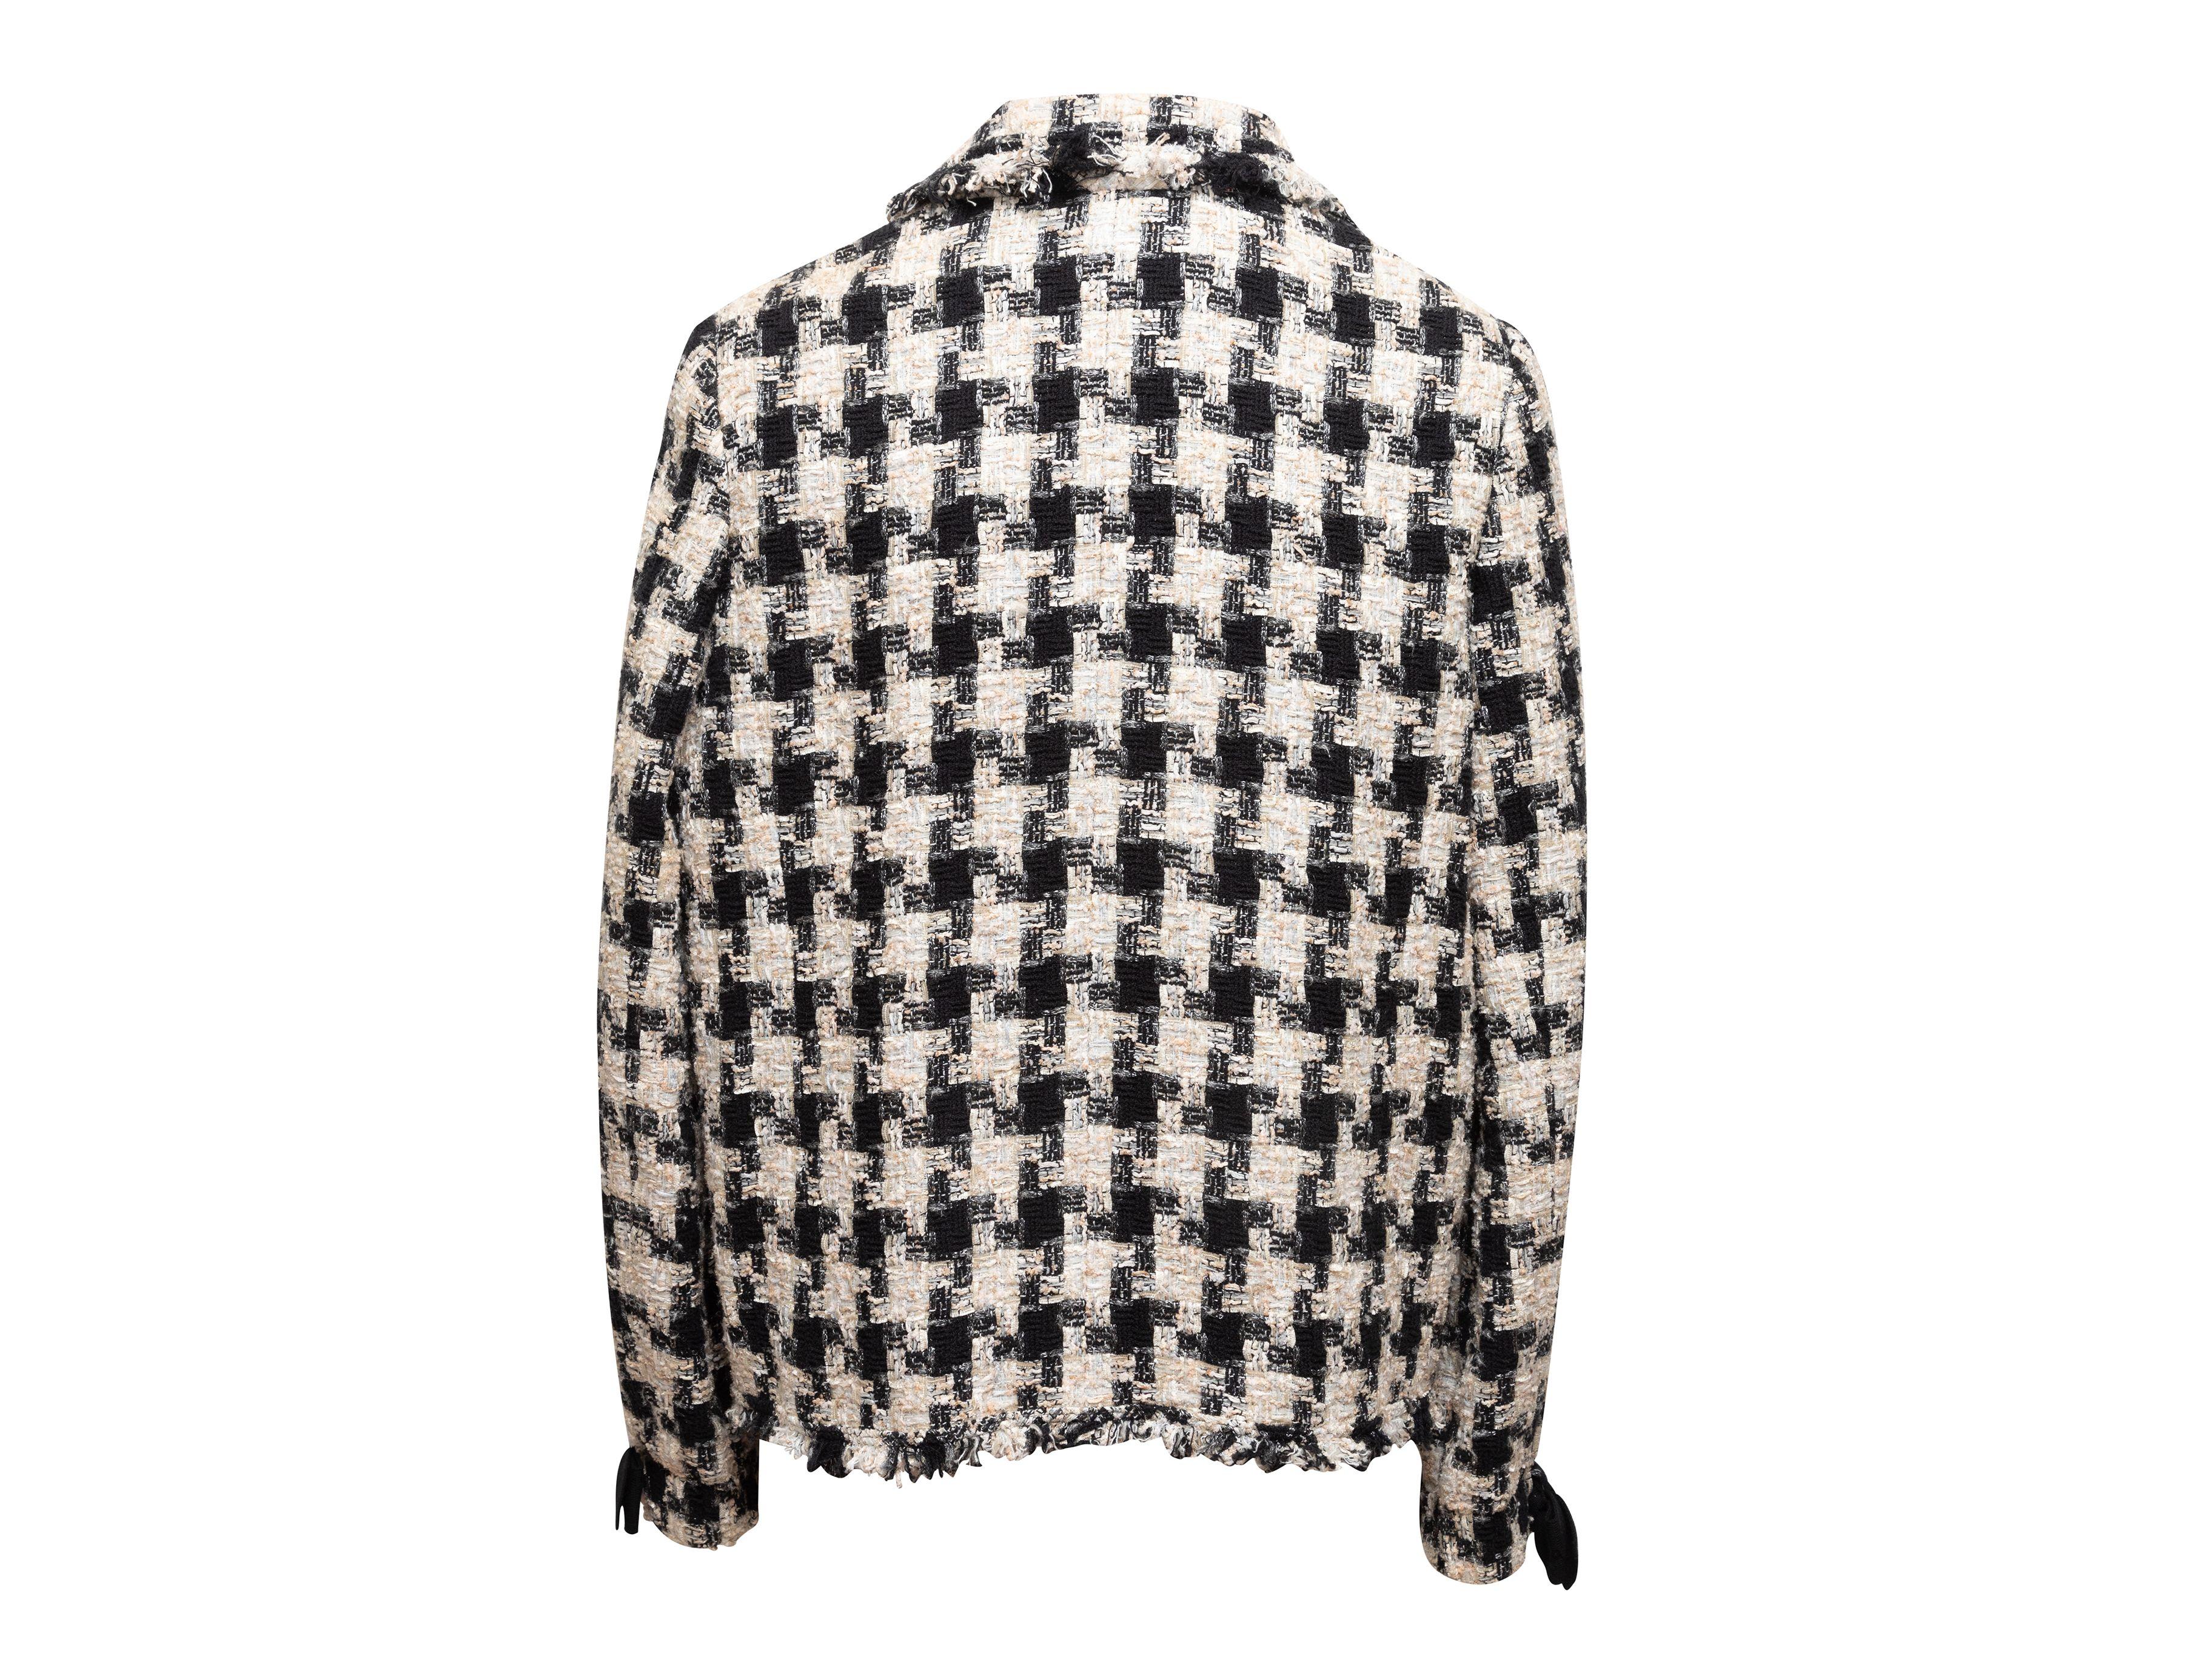 Chanel Fall 2004 Black & White Houndstooth Tweed Jacket 2